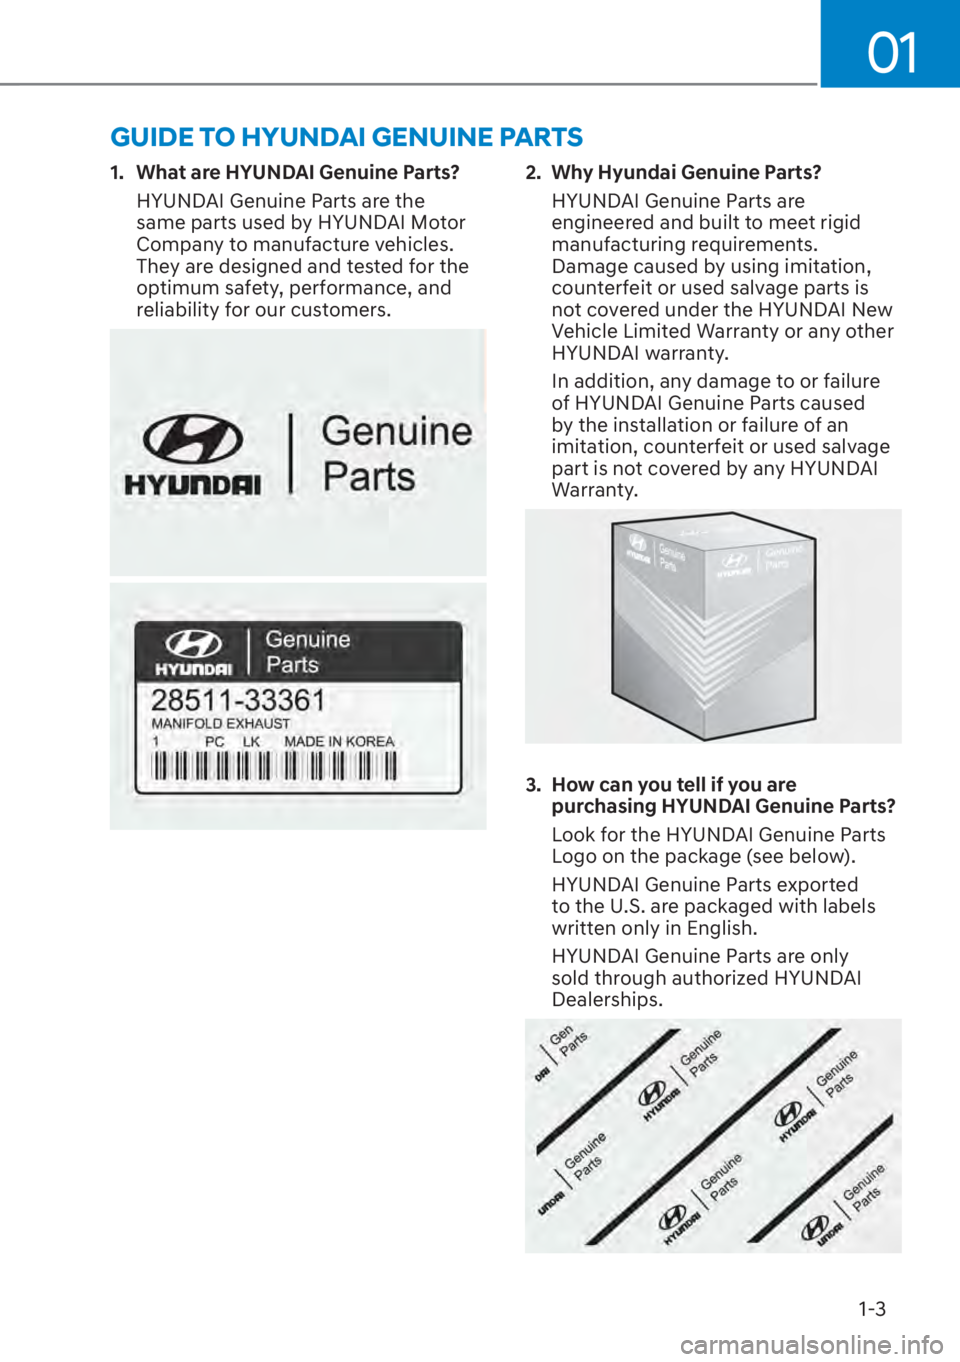 HYUNDAI SANTA FE 2023  Owners Manual 01
1-3
GUIDE TO HYUNDAI GENUINE PARTS
1.  What are HYUNDAI Genuine Parts?HYUNDAI Genuine Parts are the 
same parts used by HYUNDAI Motor 
Company to manufacture vehicles. 
They are designed and tested